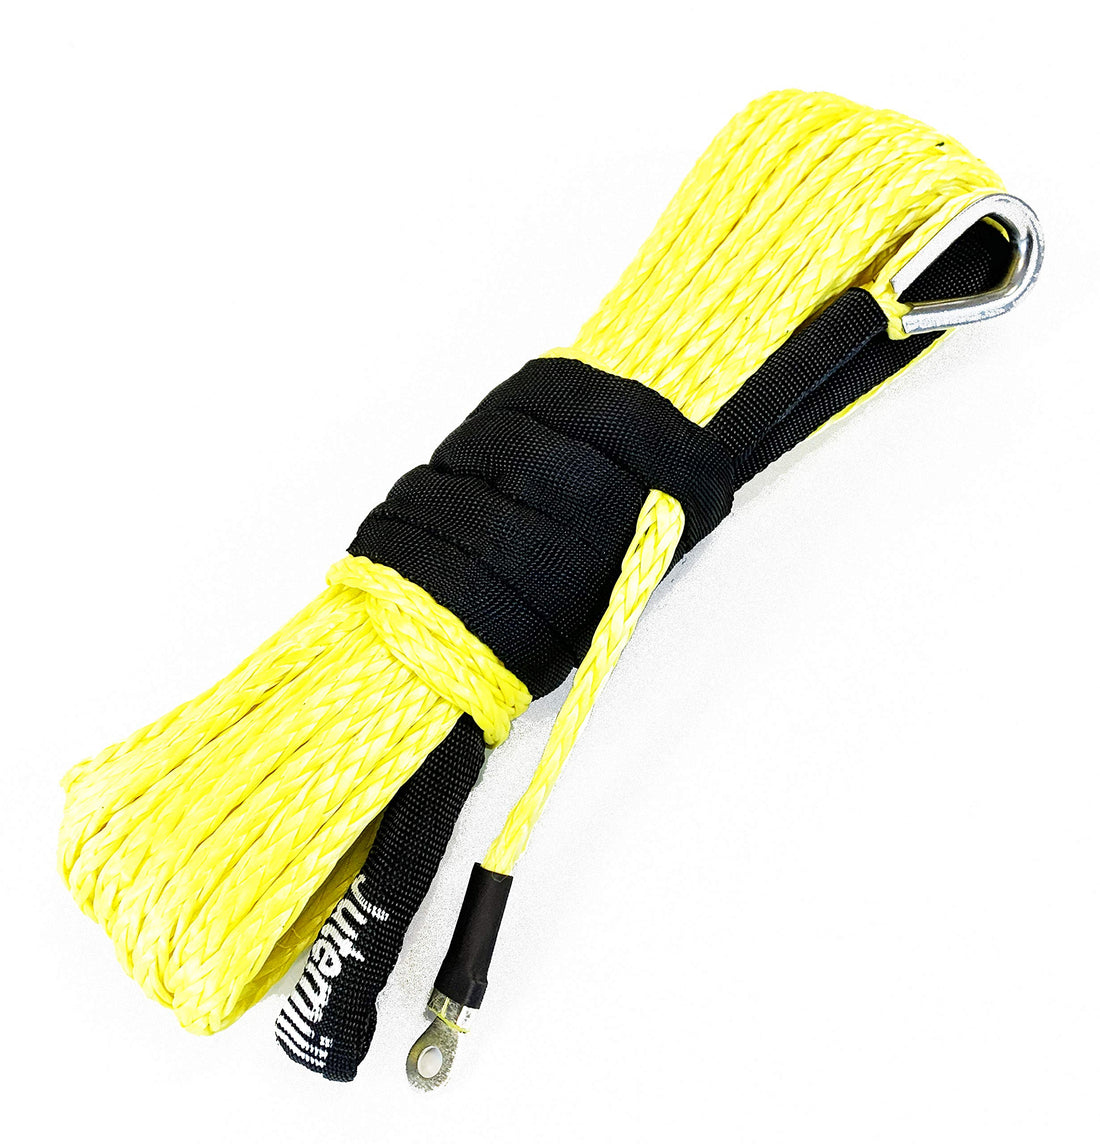 Boat Ramsey Synthetic Winch Rope - Yellow | Winch Line Cable for Off Road ATV/UTV, SUV, Truck